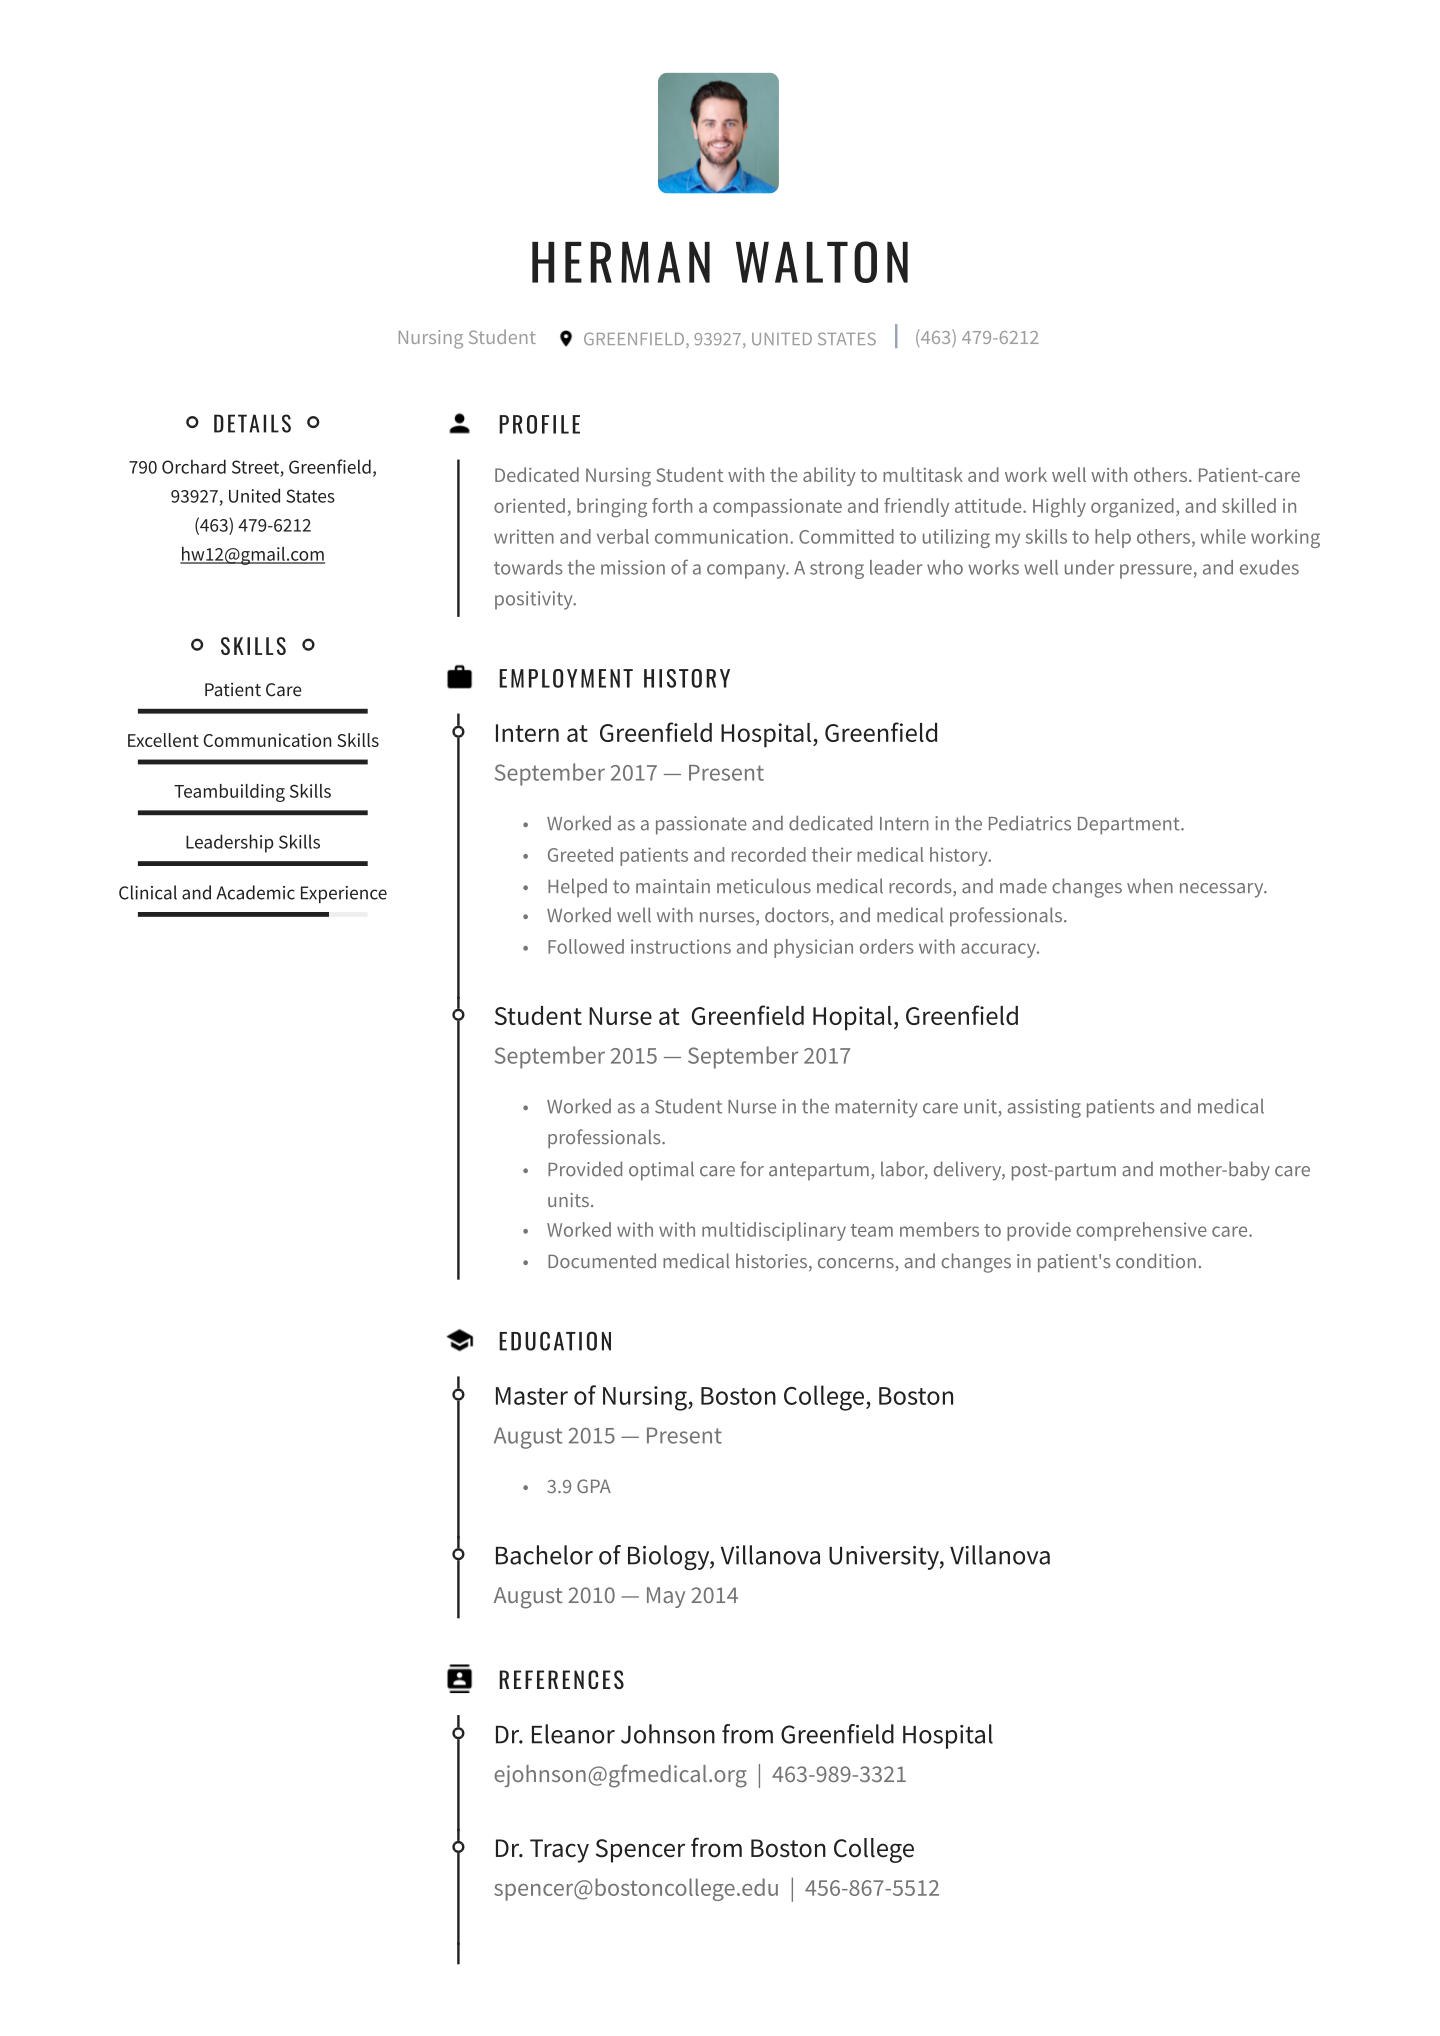 Nursing Student Resume Examples Writing Tips 2020 Free for size 1440 X 2036